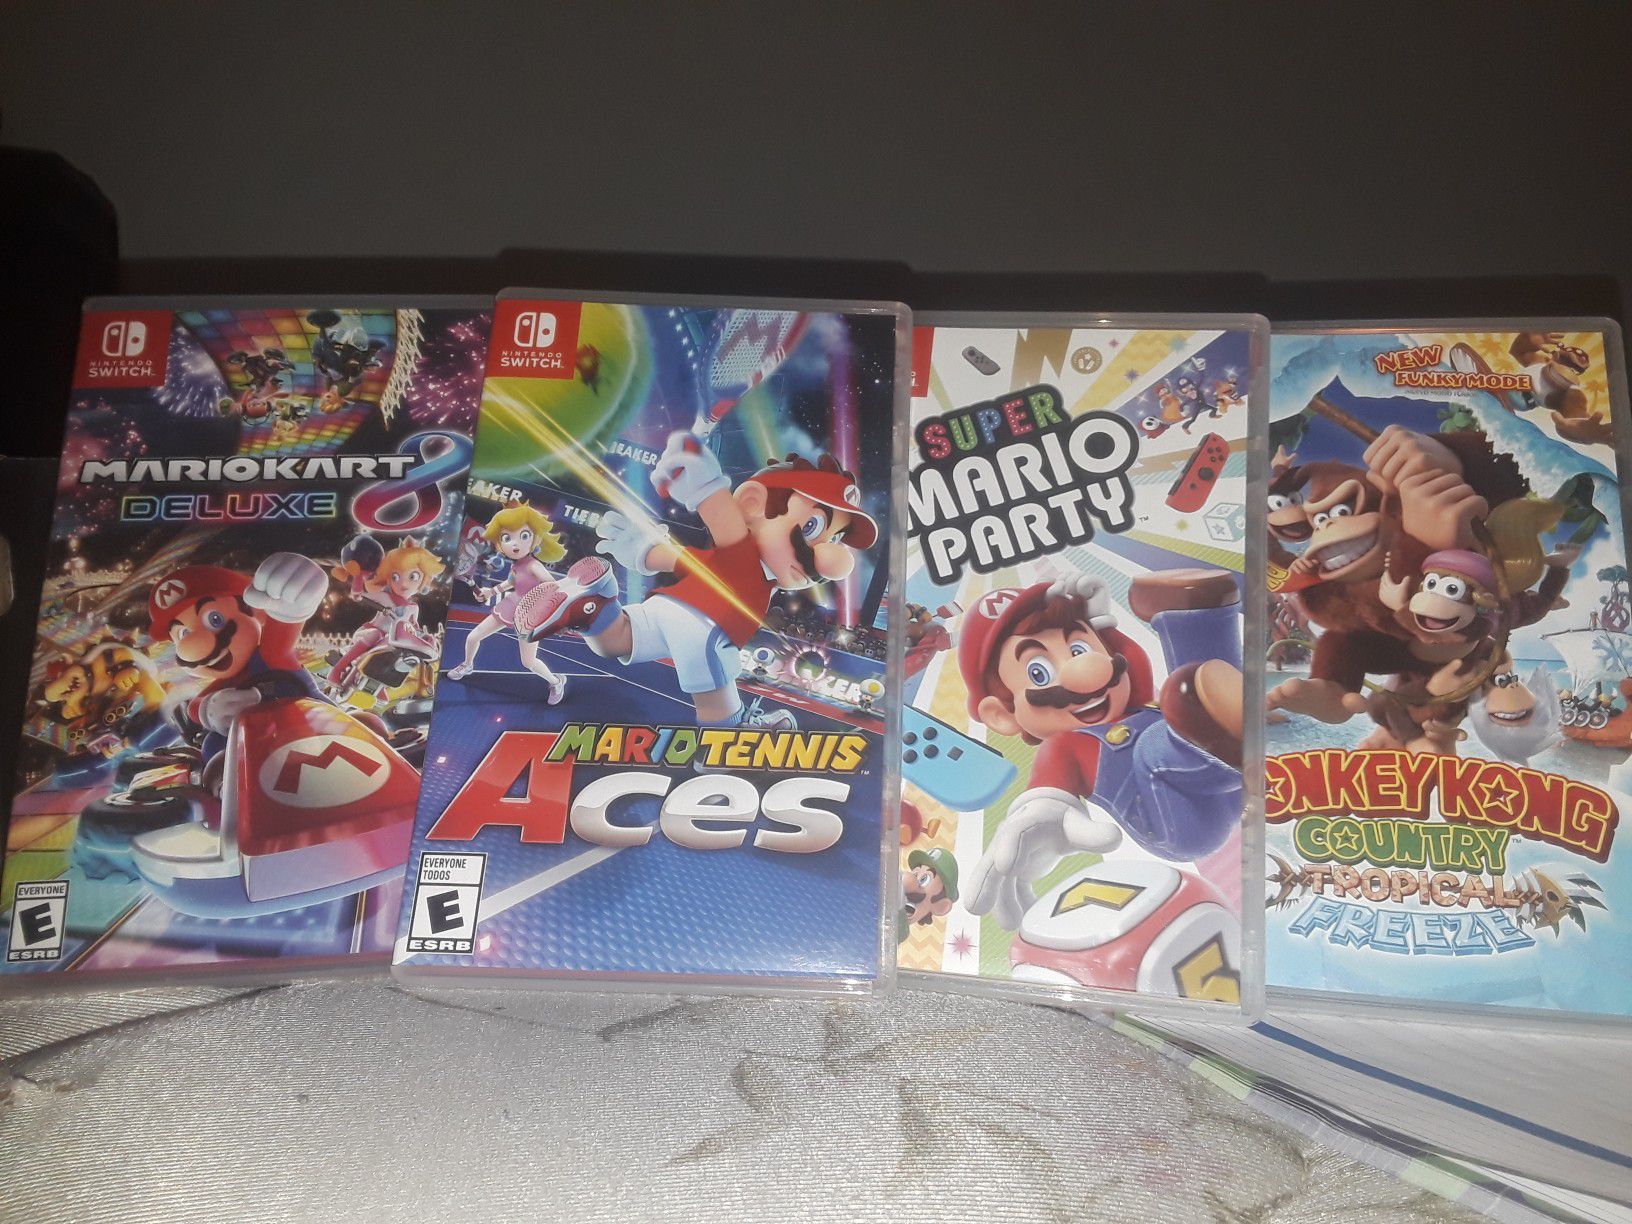 Any Of The Games Shown, Also Have A Switch For Sell If Intrested